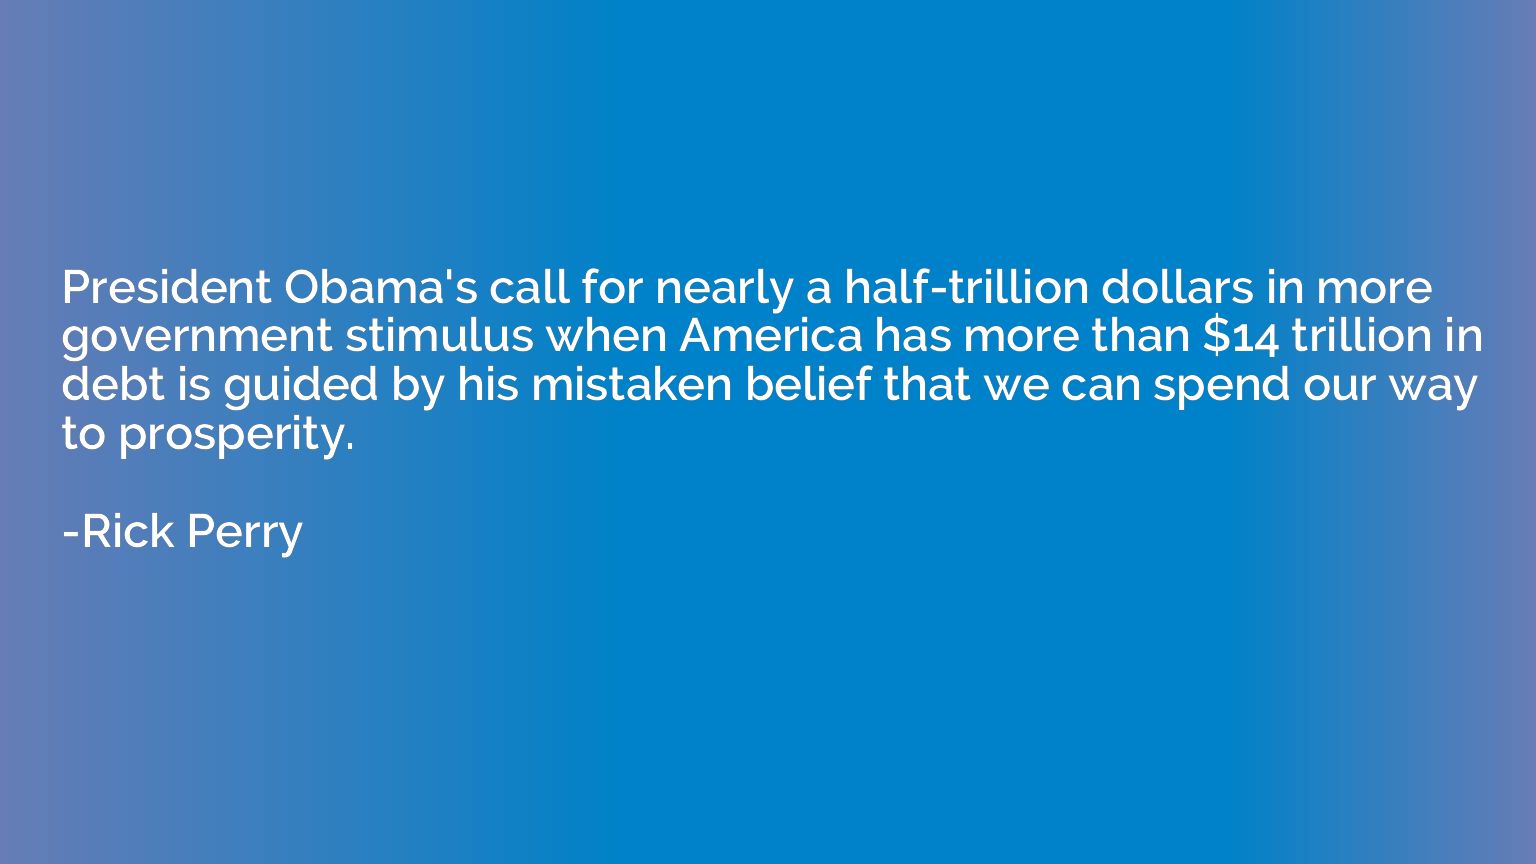 President Obama's call for nearly a half-trillion dollars in